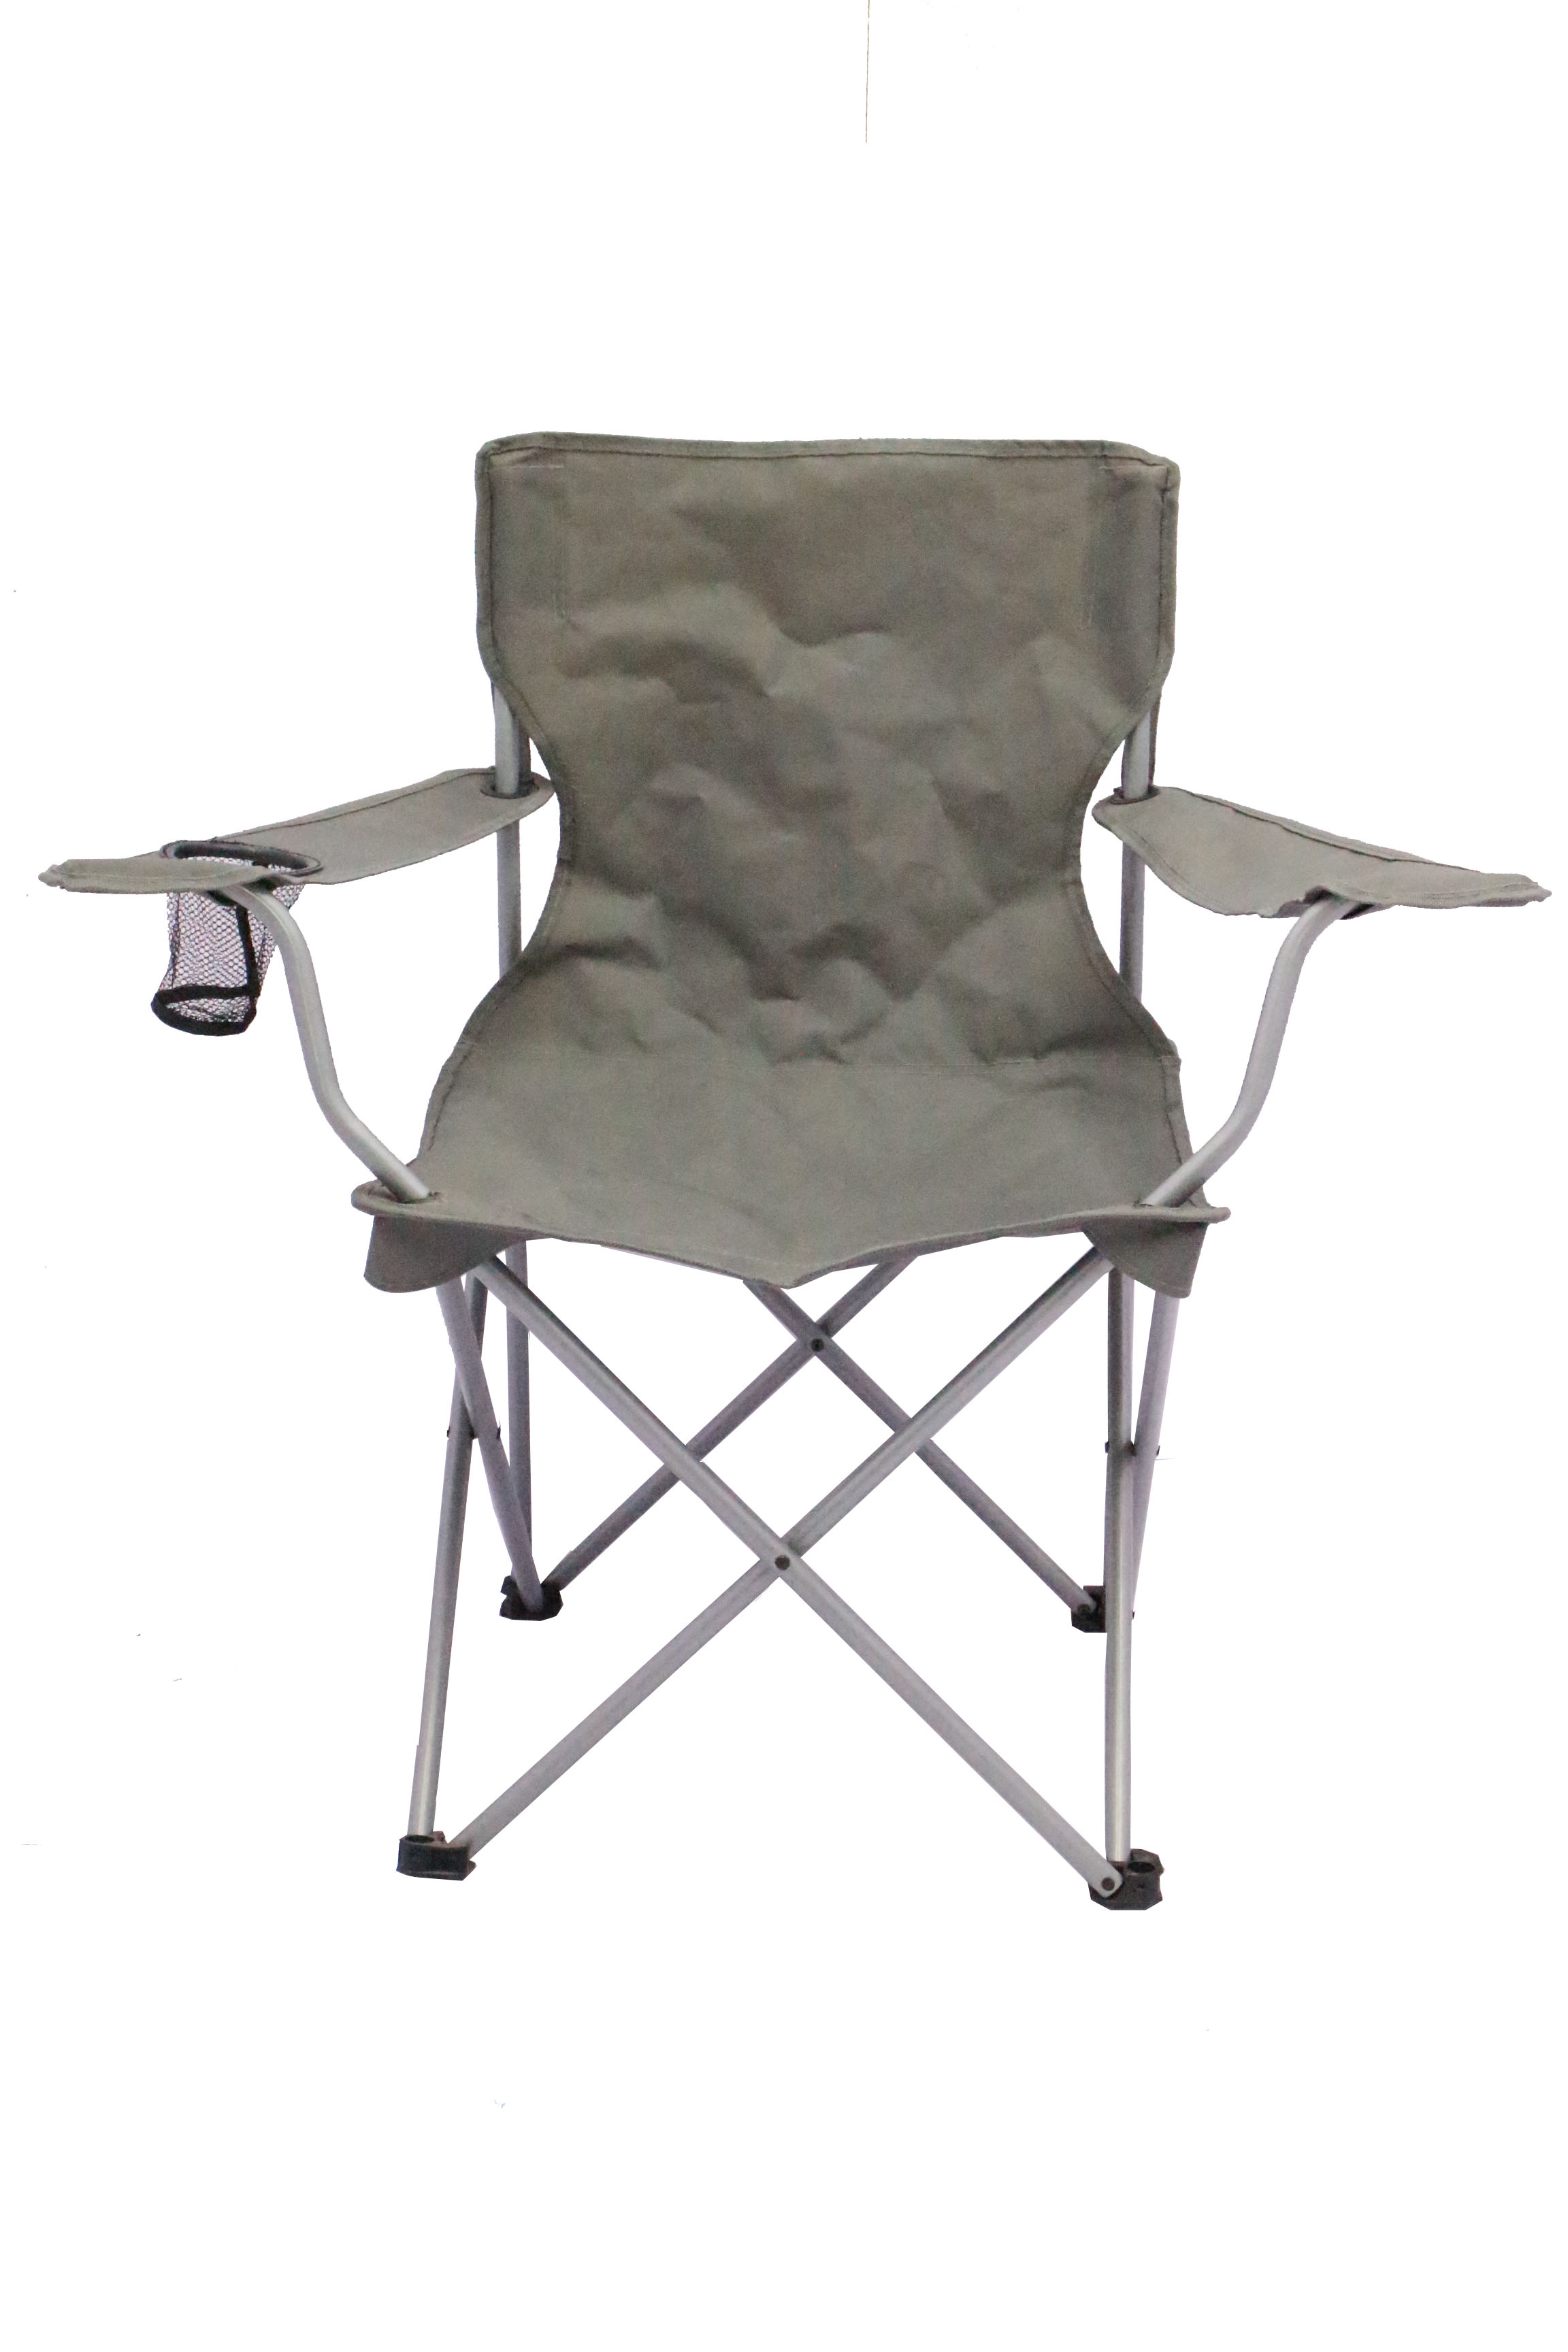 Ozark Trail Quad Folding Camp Chair 2 Pack,with Mesh Cup Holder - image 16 of 17